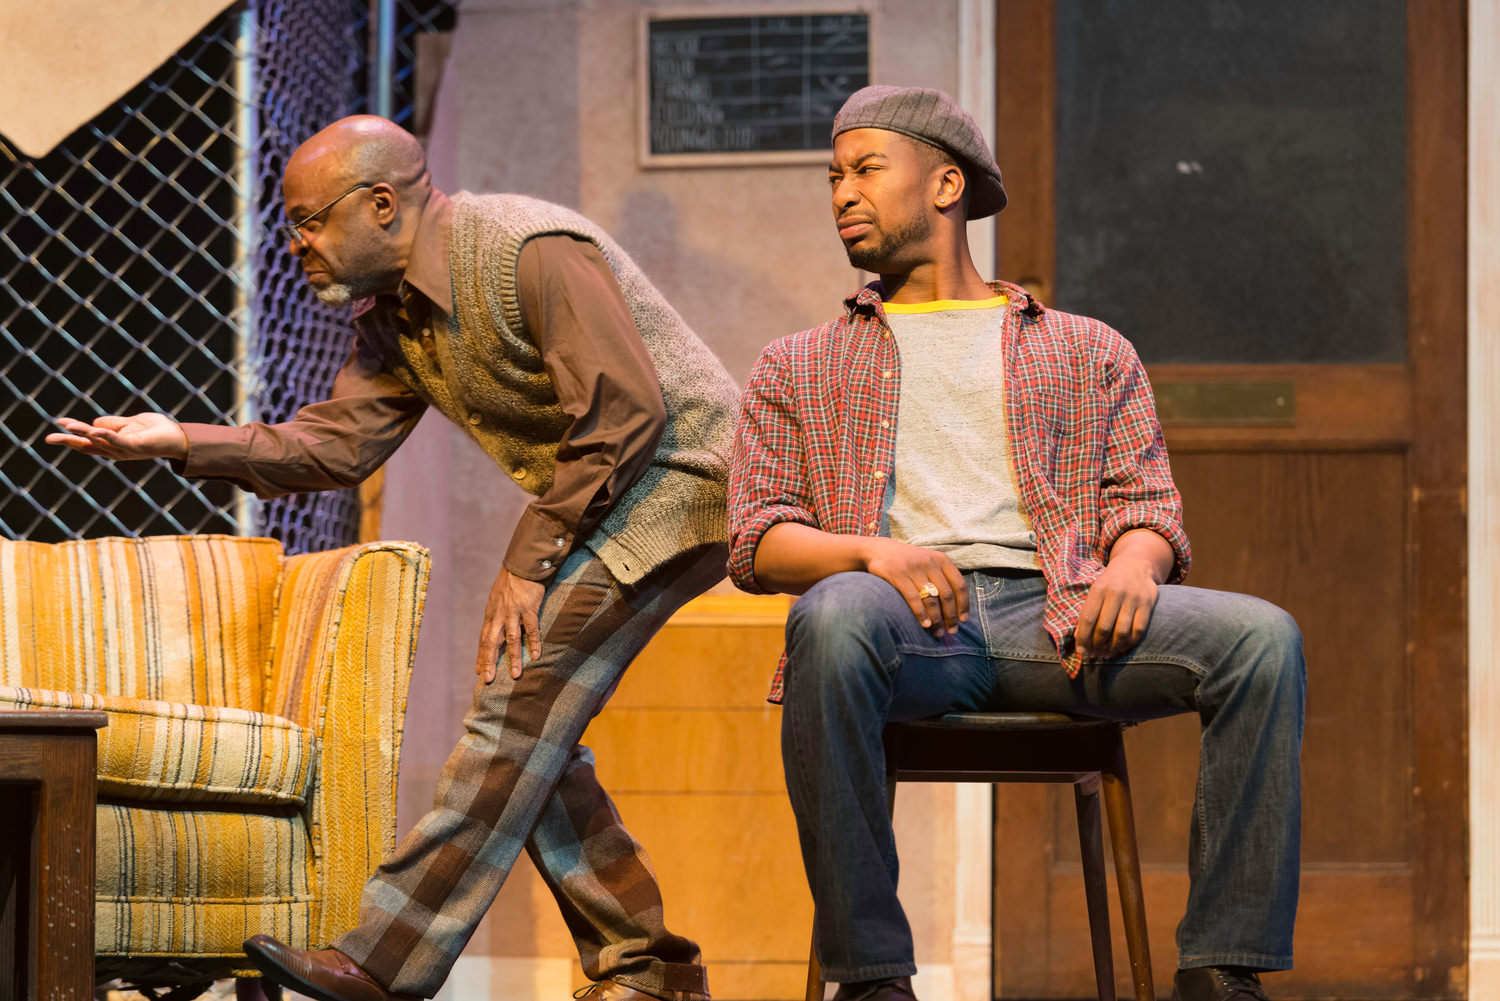 ShawnJ West (Turnbo), L. Peter Callender (Becker), and Edward Neville Ewell (Youngblood) in African-American Shakespeare Company’s production of ‘Jitney’, directed by L. Peter Callender; photo credit: Lance Huntley 5